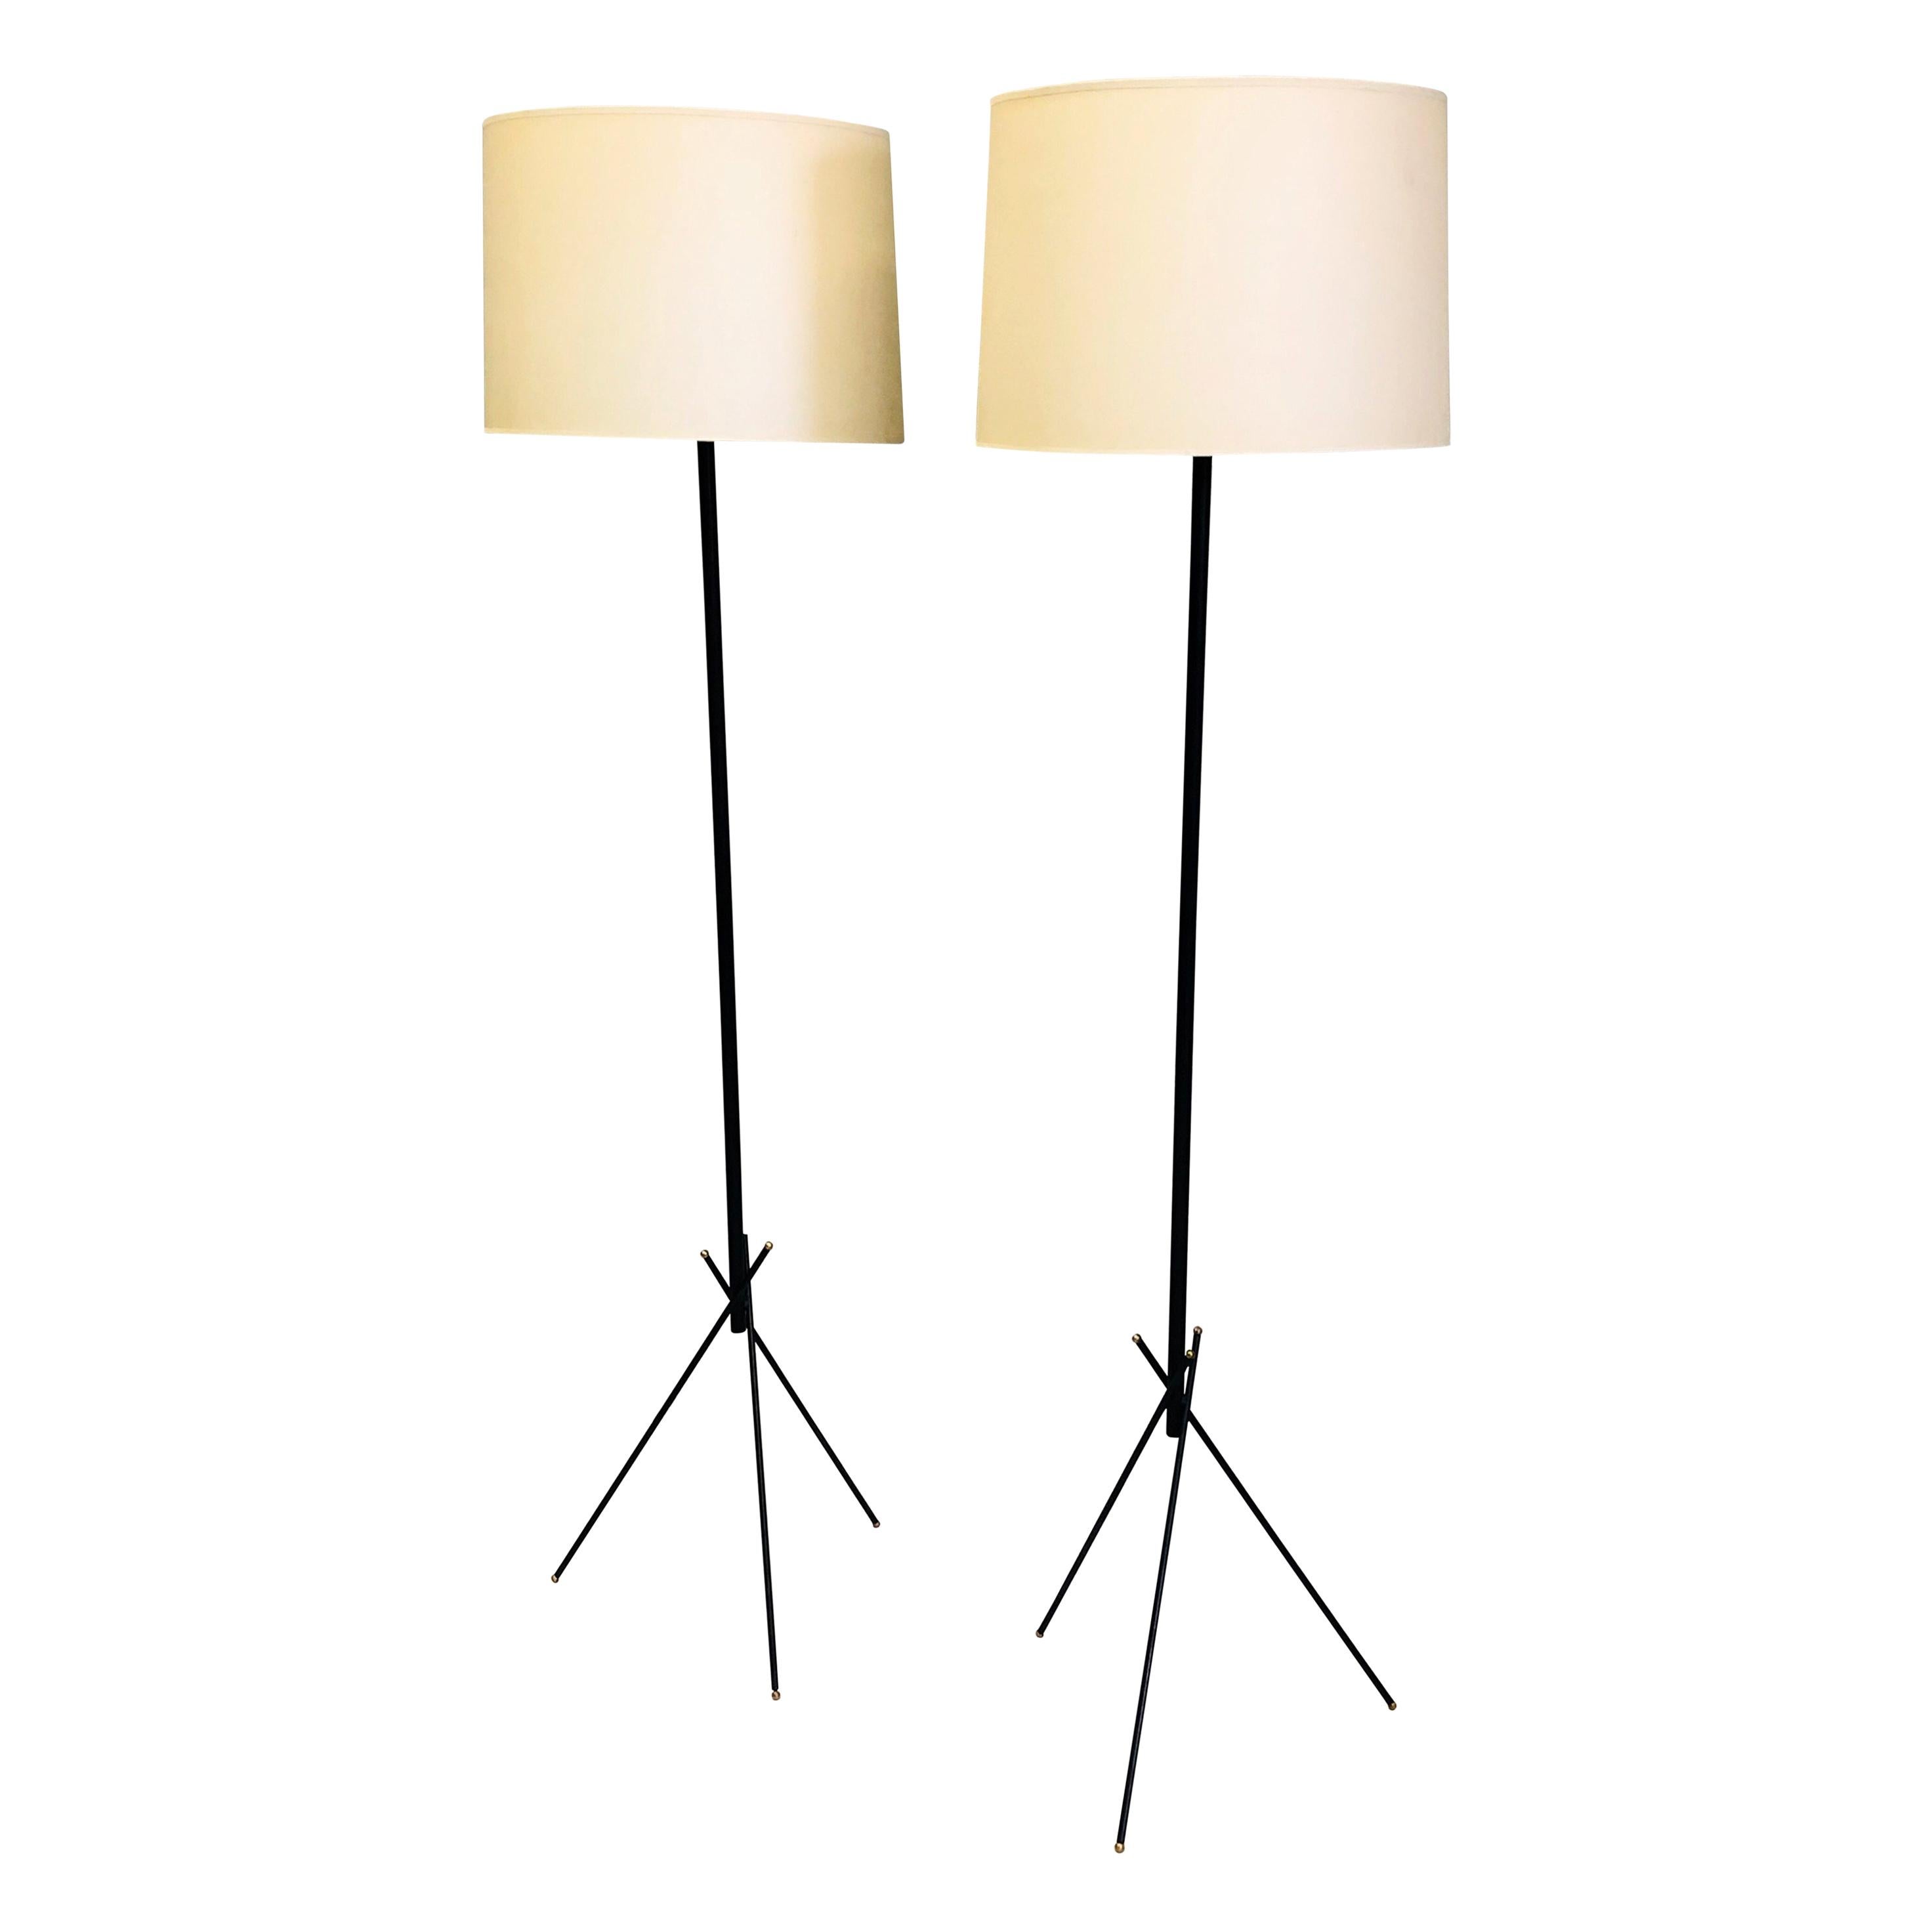 Pair of French Mid-Century Modern Wrought Iron Floor Lamps, Disderot For Sale